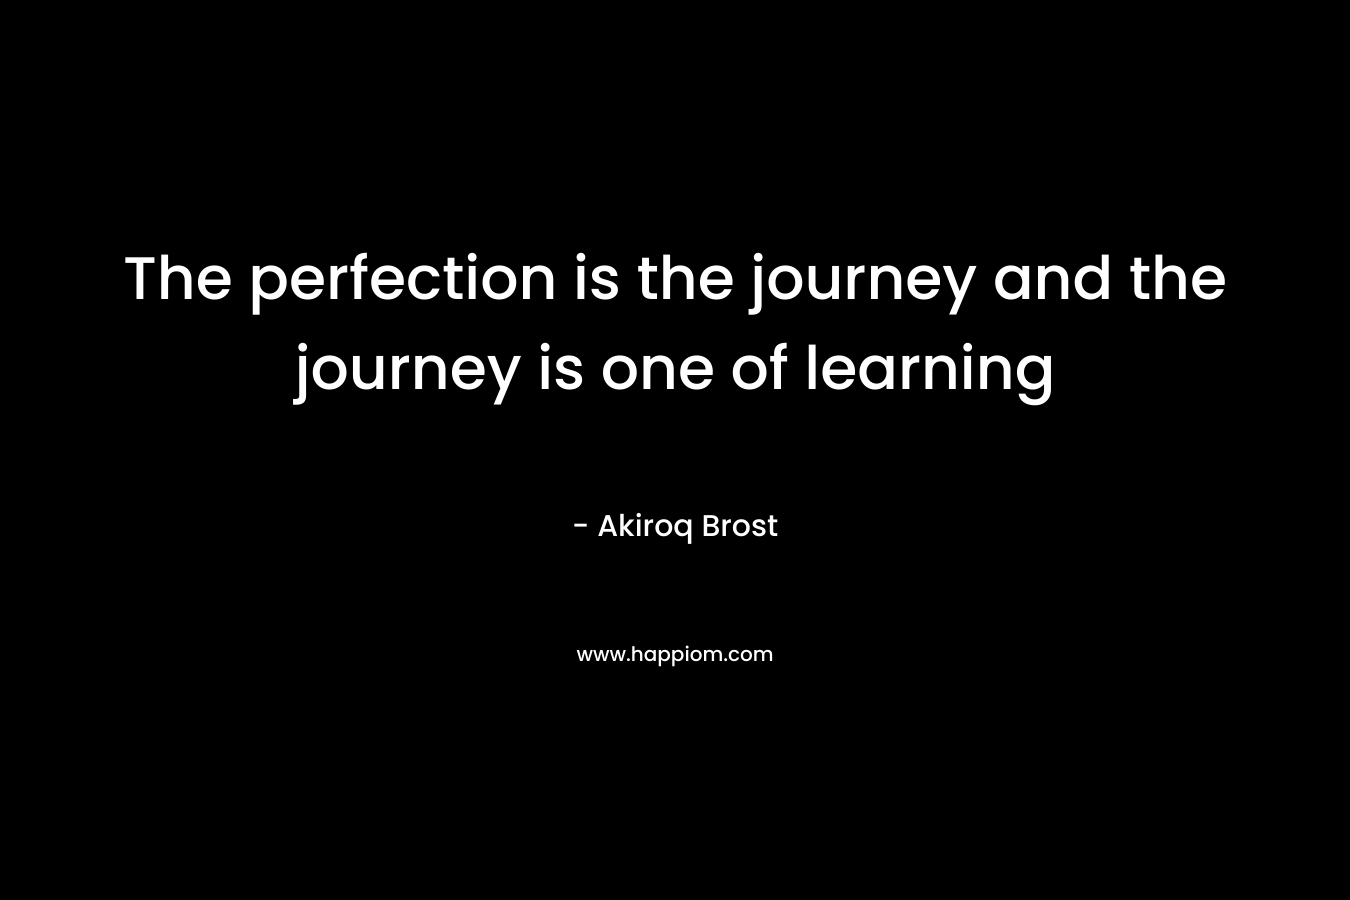 The perfection is the journey and the journey is one of learning